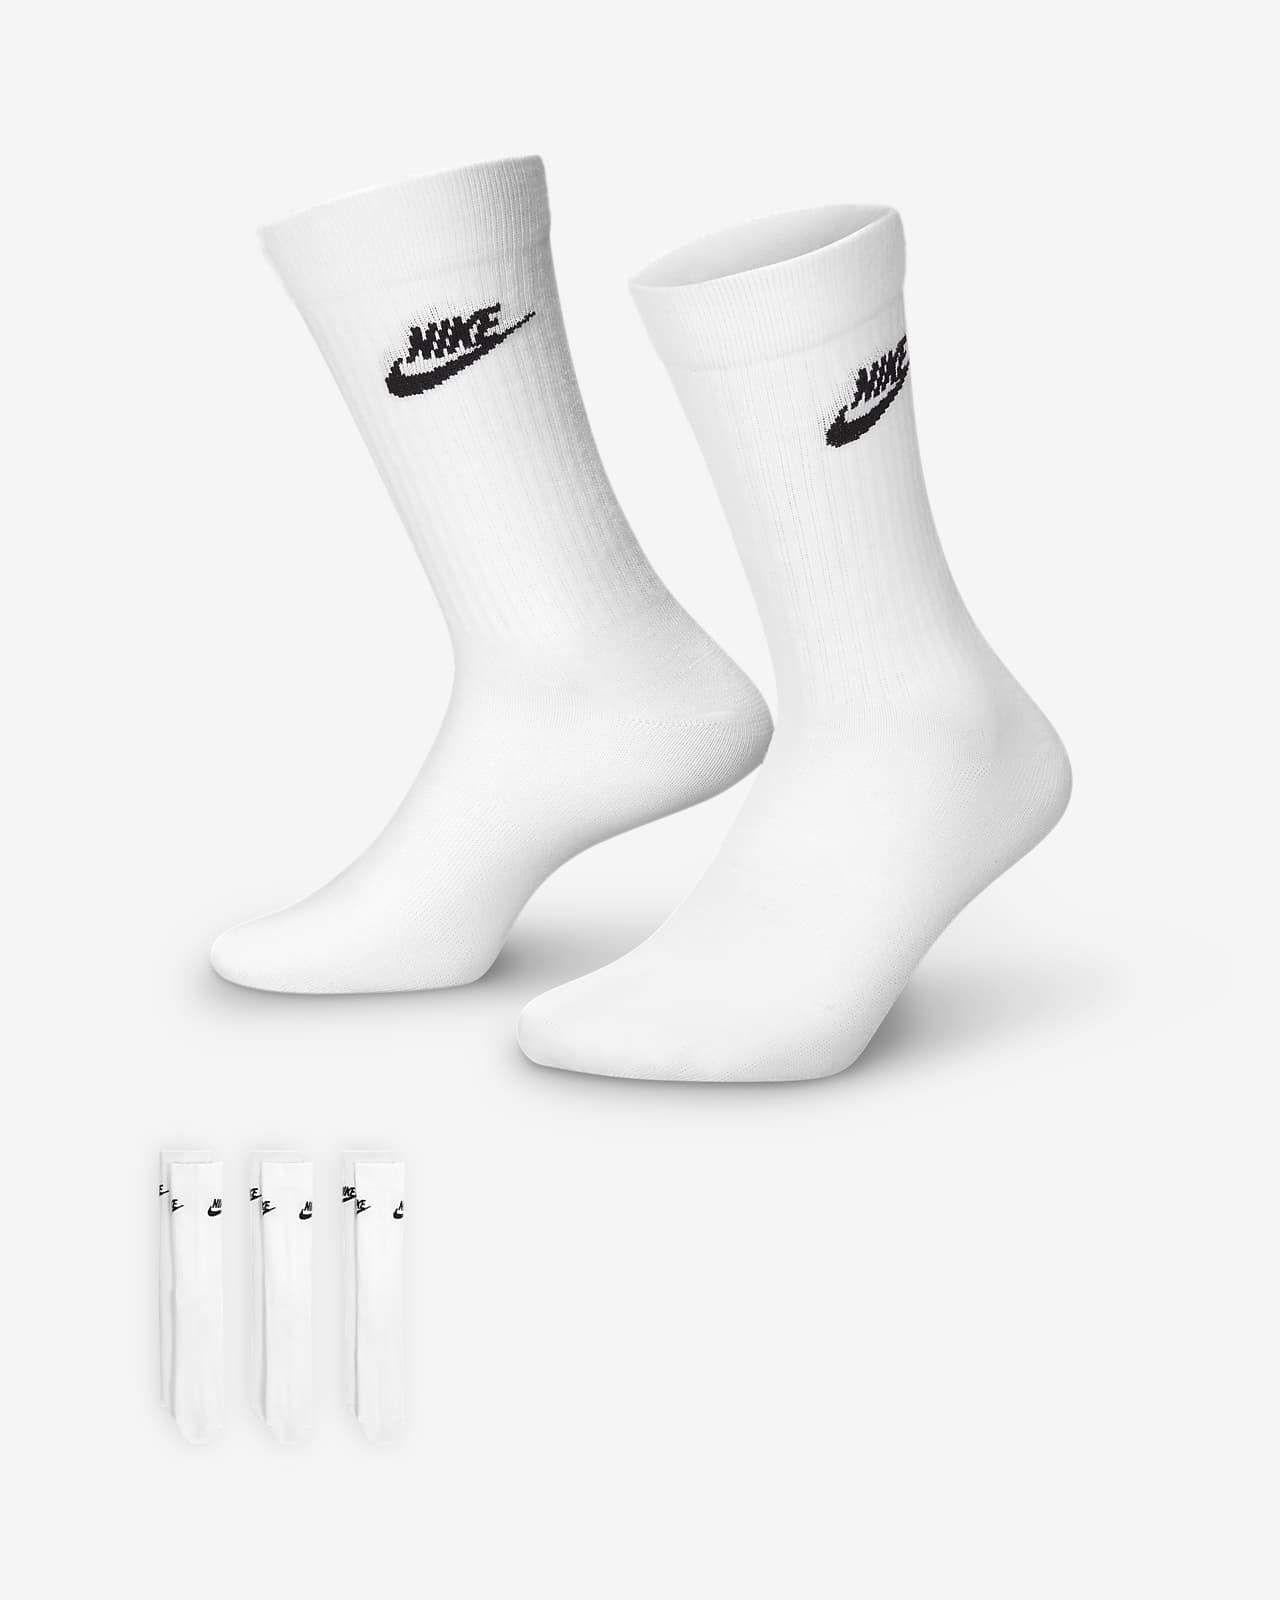 https://static.nike.com/a/images/t_PDP_1280_v1/f_auto,q_auto:eco/43b00079-ecb9-4ca6-8256-07c7f93359f8/chaussettes-mi-mollet-sportswear-everyday-essential-5bH3zm.png